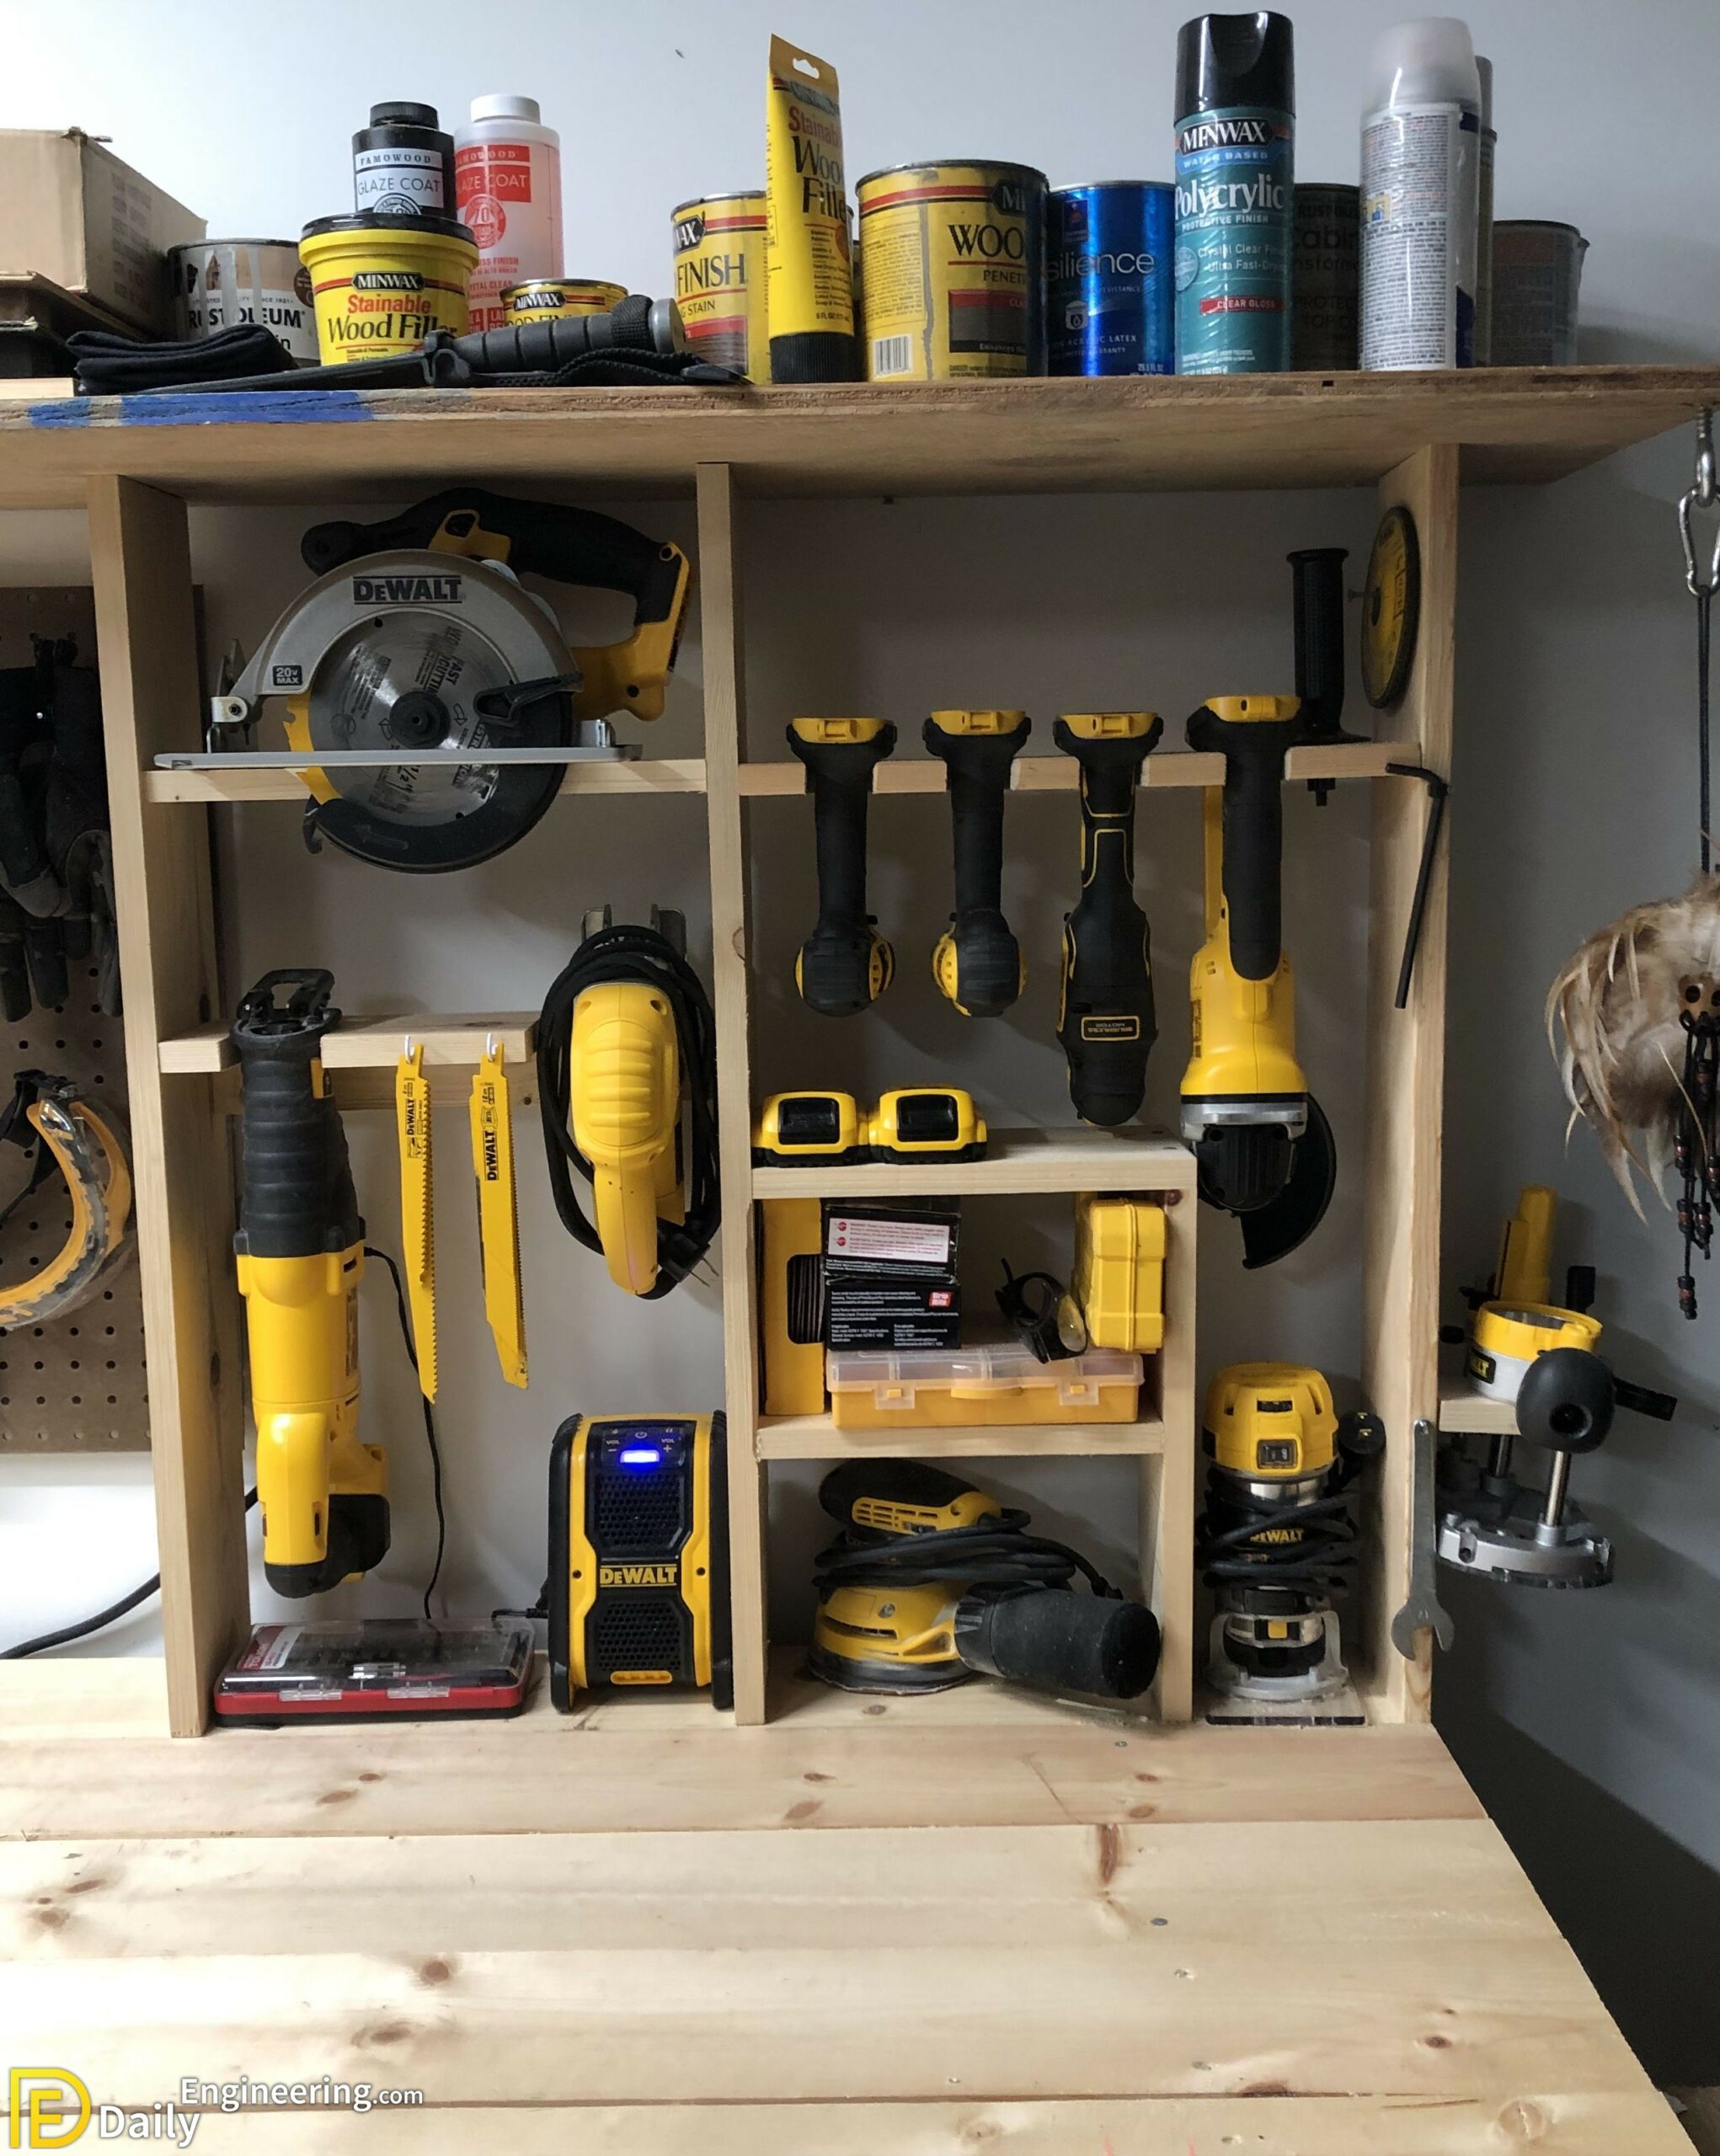 32+ Useful And Simple DIY Storage Ideas For Your Garage - Daily Engineering